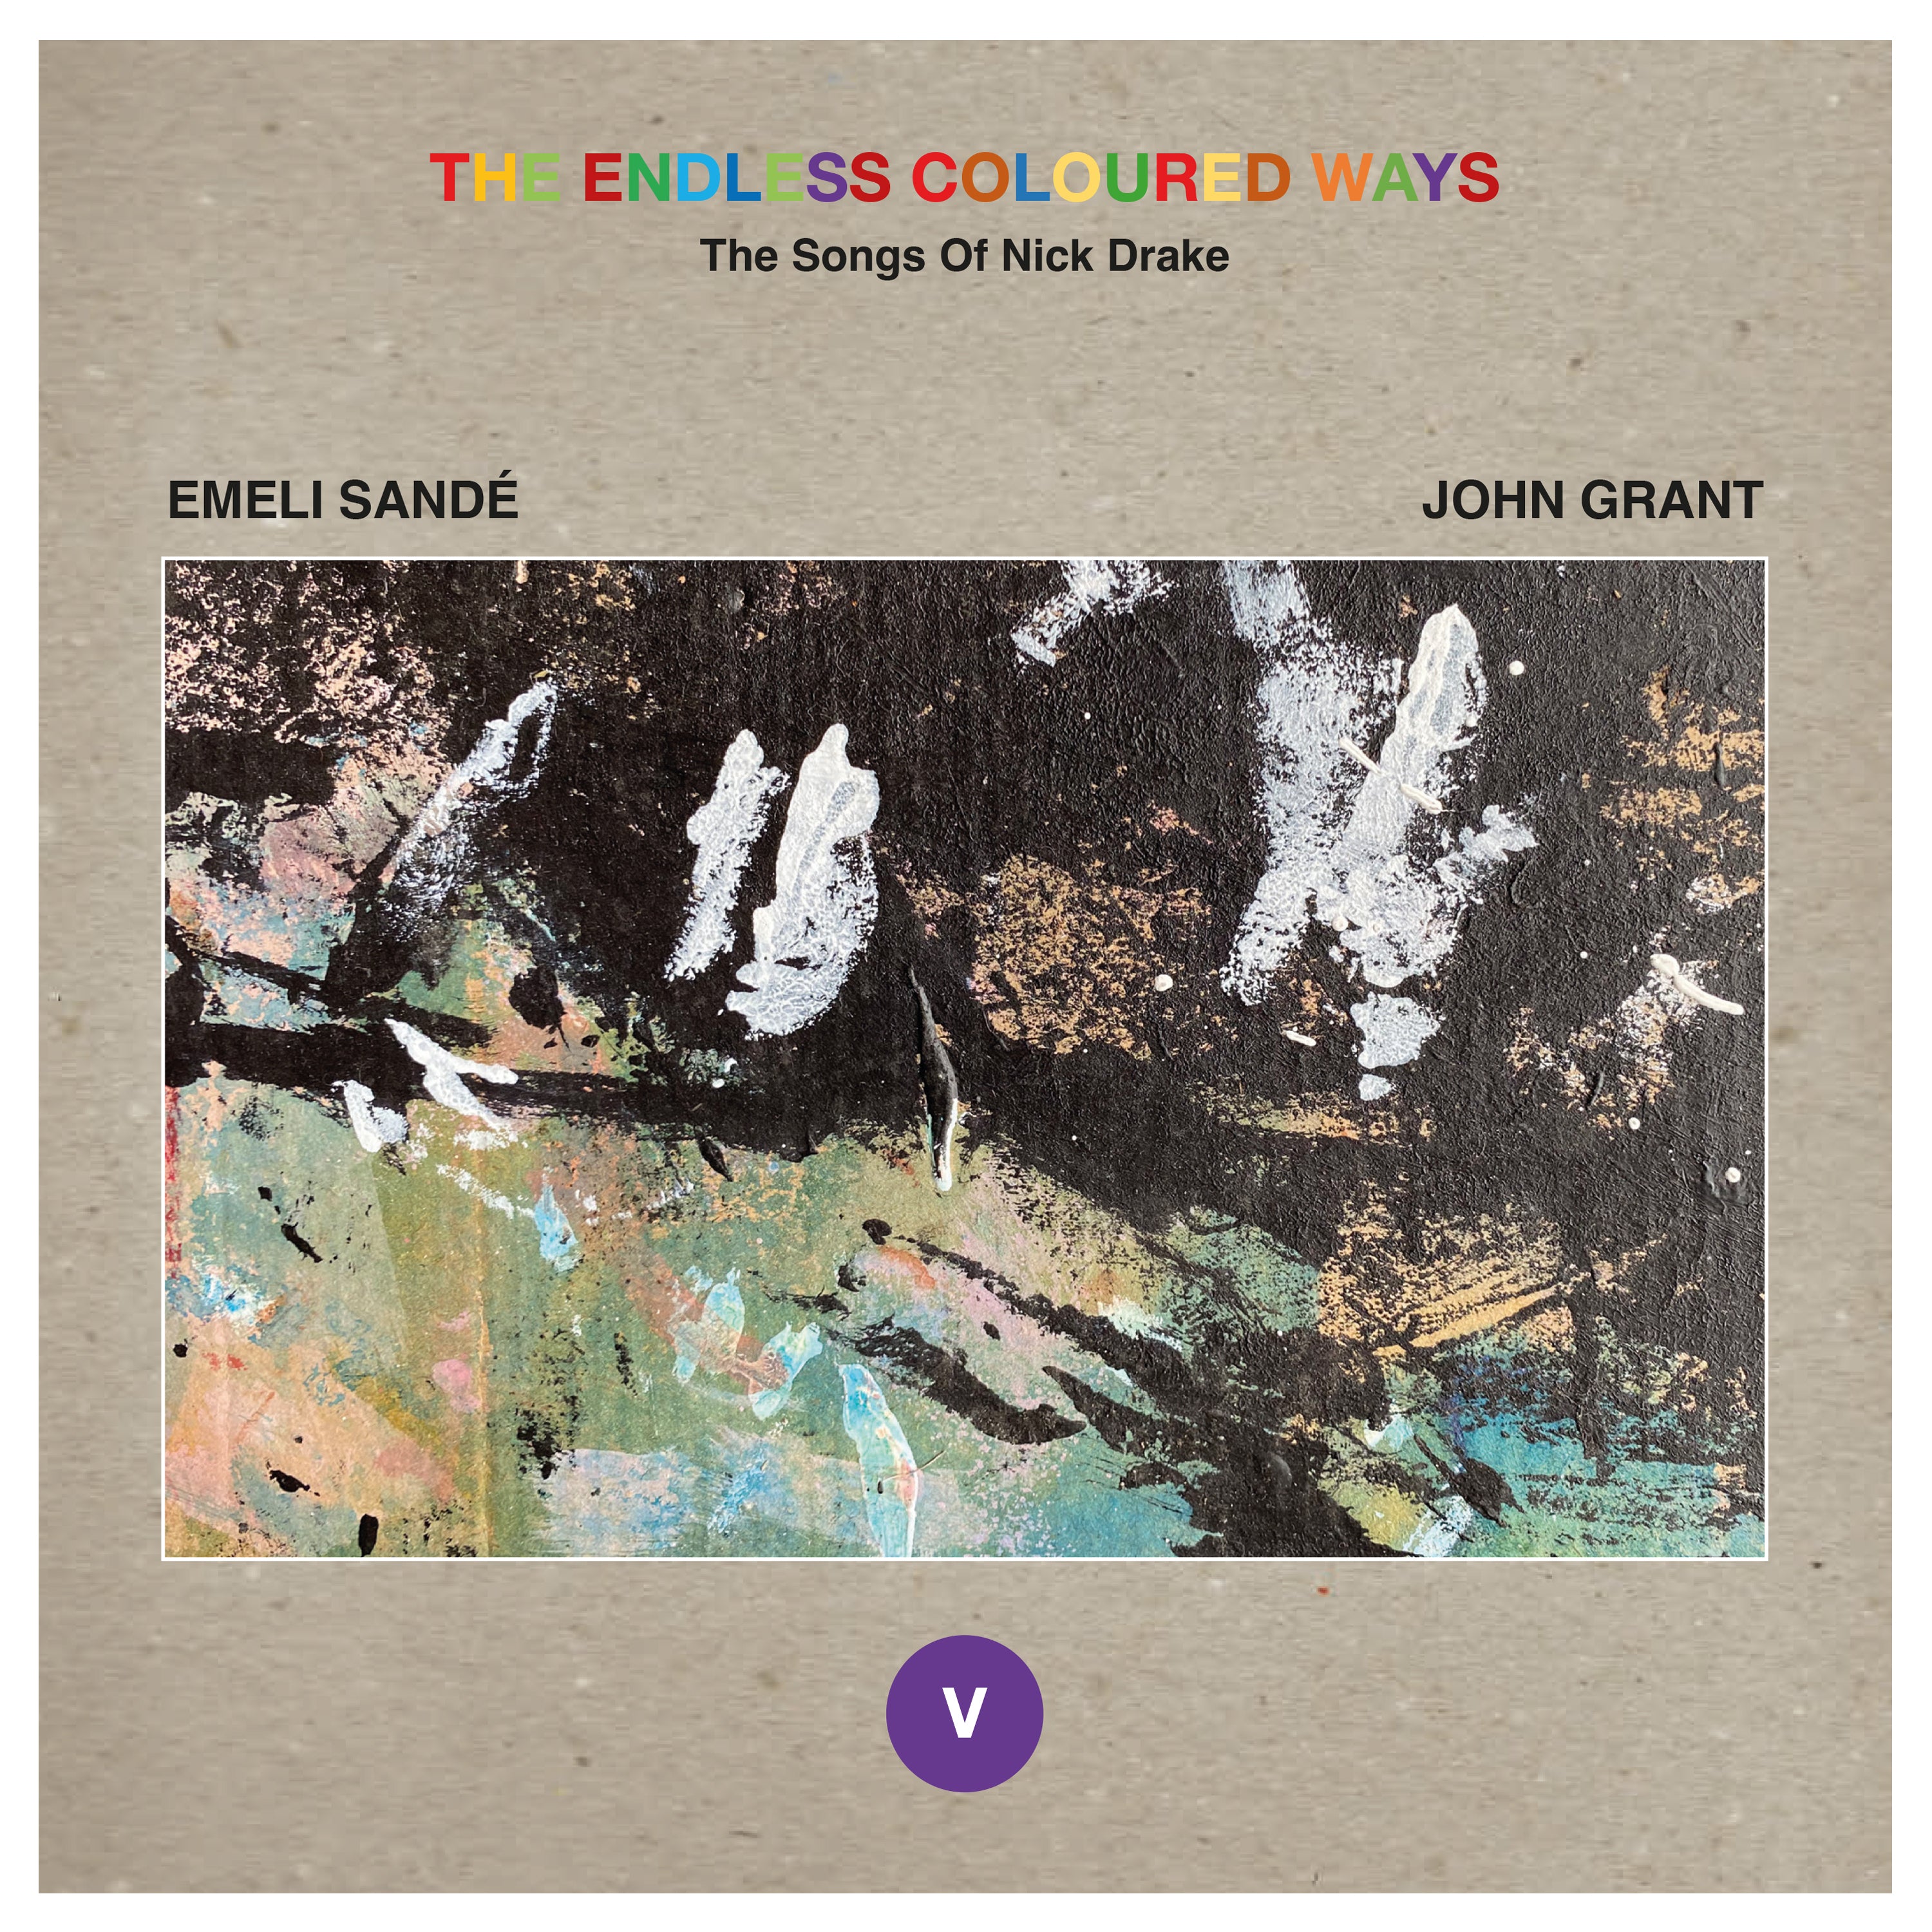 Emeli Sandé & John Grant - The Endless Coloured Ways: The Songs of Nick Drake - One Of These Things First / Day Is Done [7"]